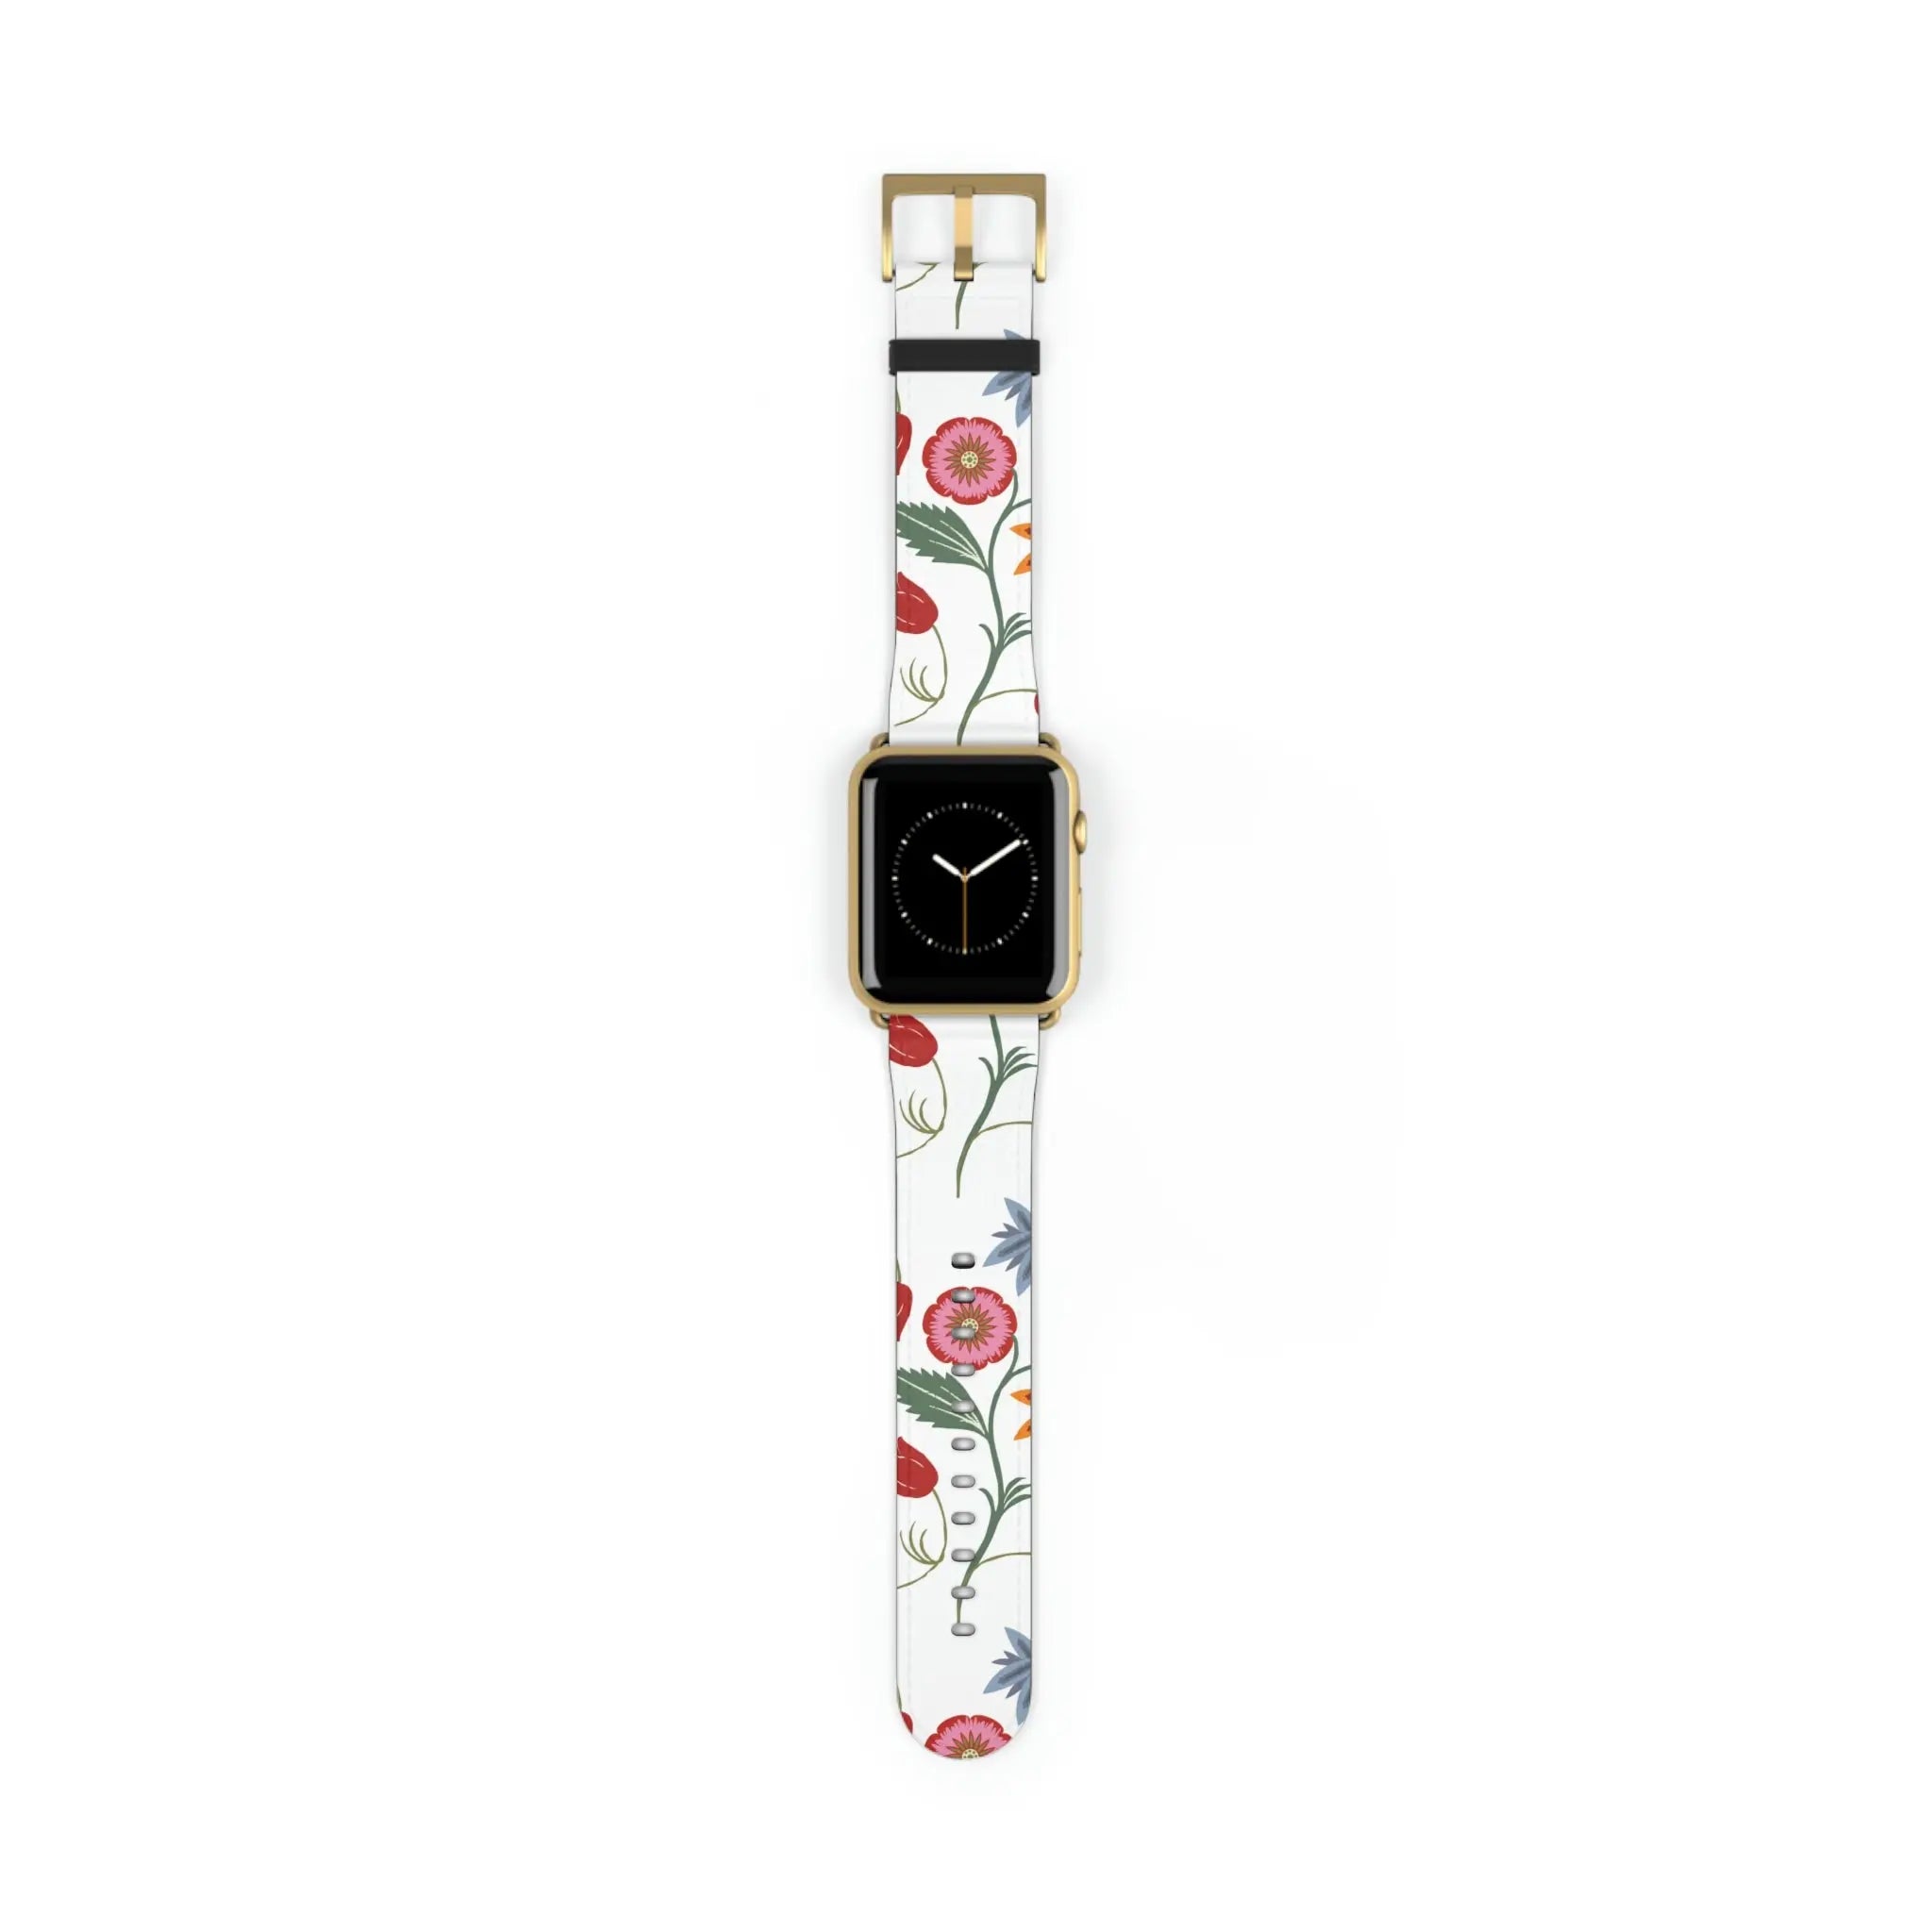  Just Bloom (Wild Flowers) Watch Band for Apple Watch Watch Bands42-45mmGoldMatte